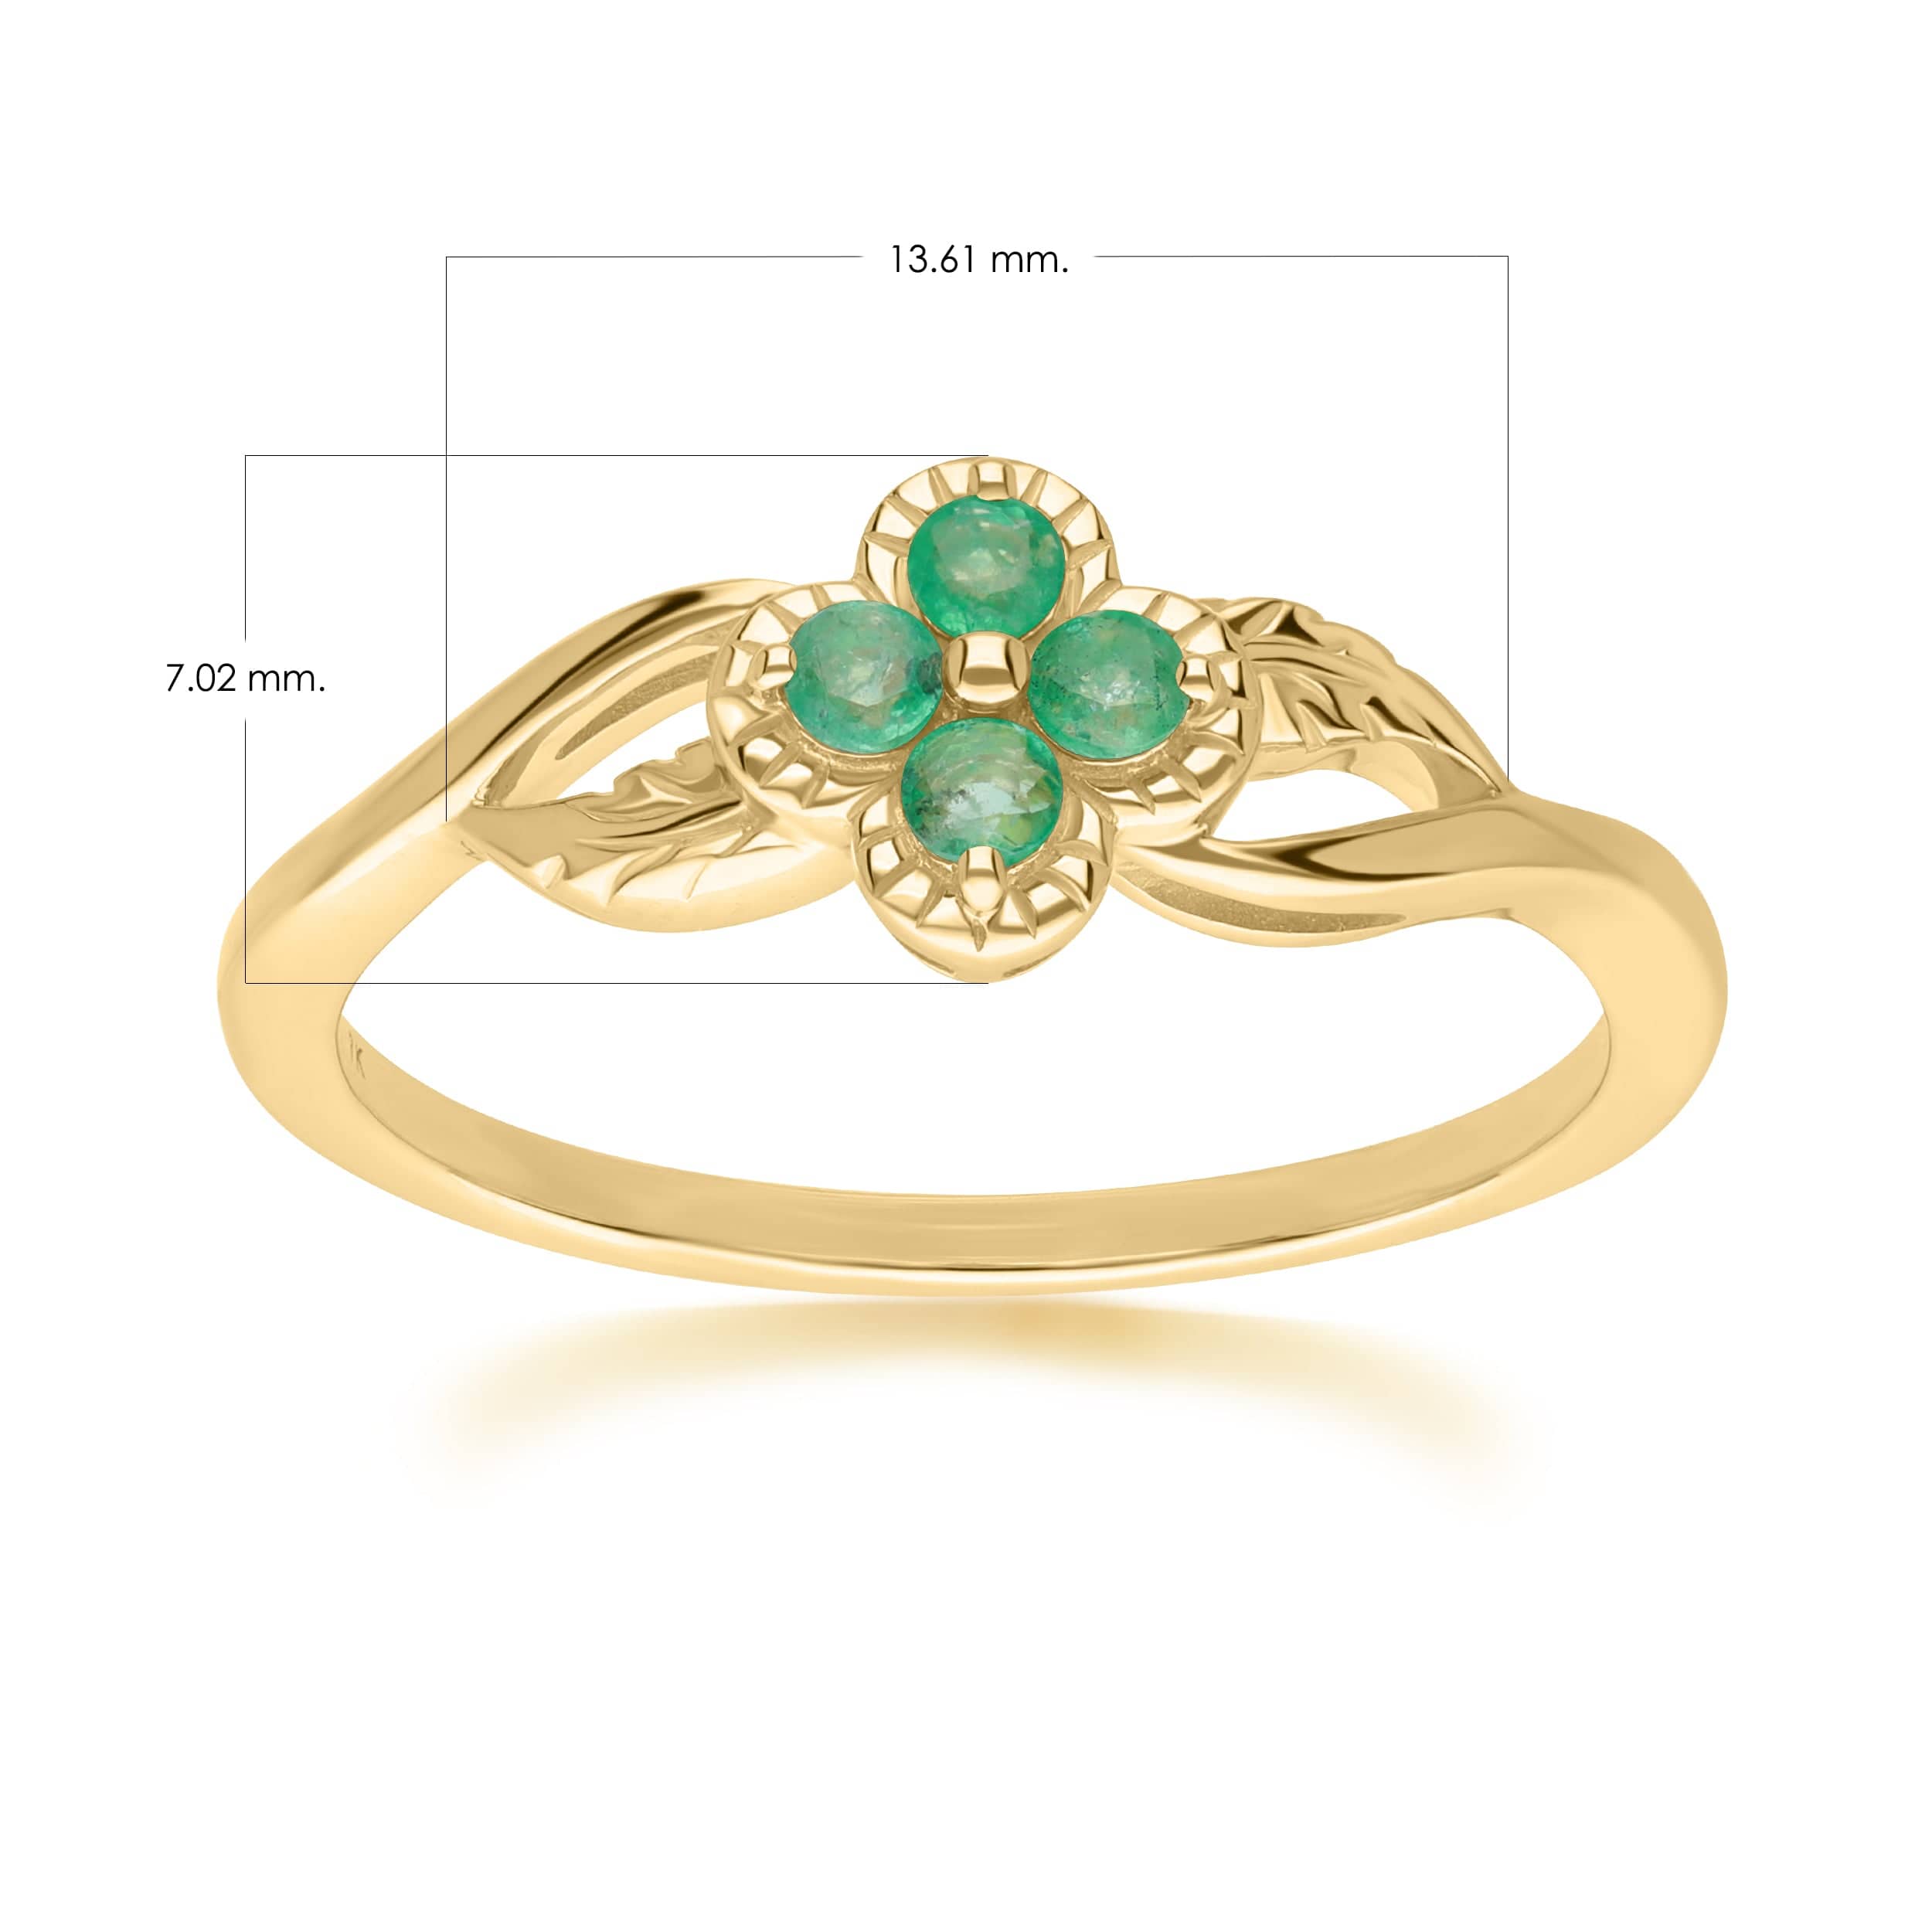 Floral Round Emerald Ring in 9ct Yellow Gold